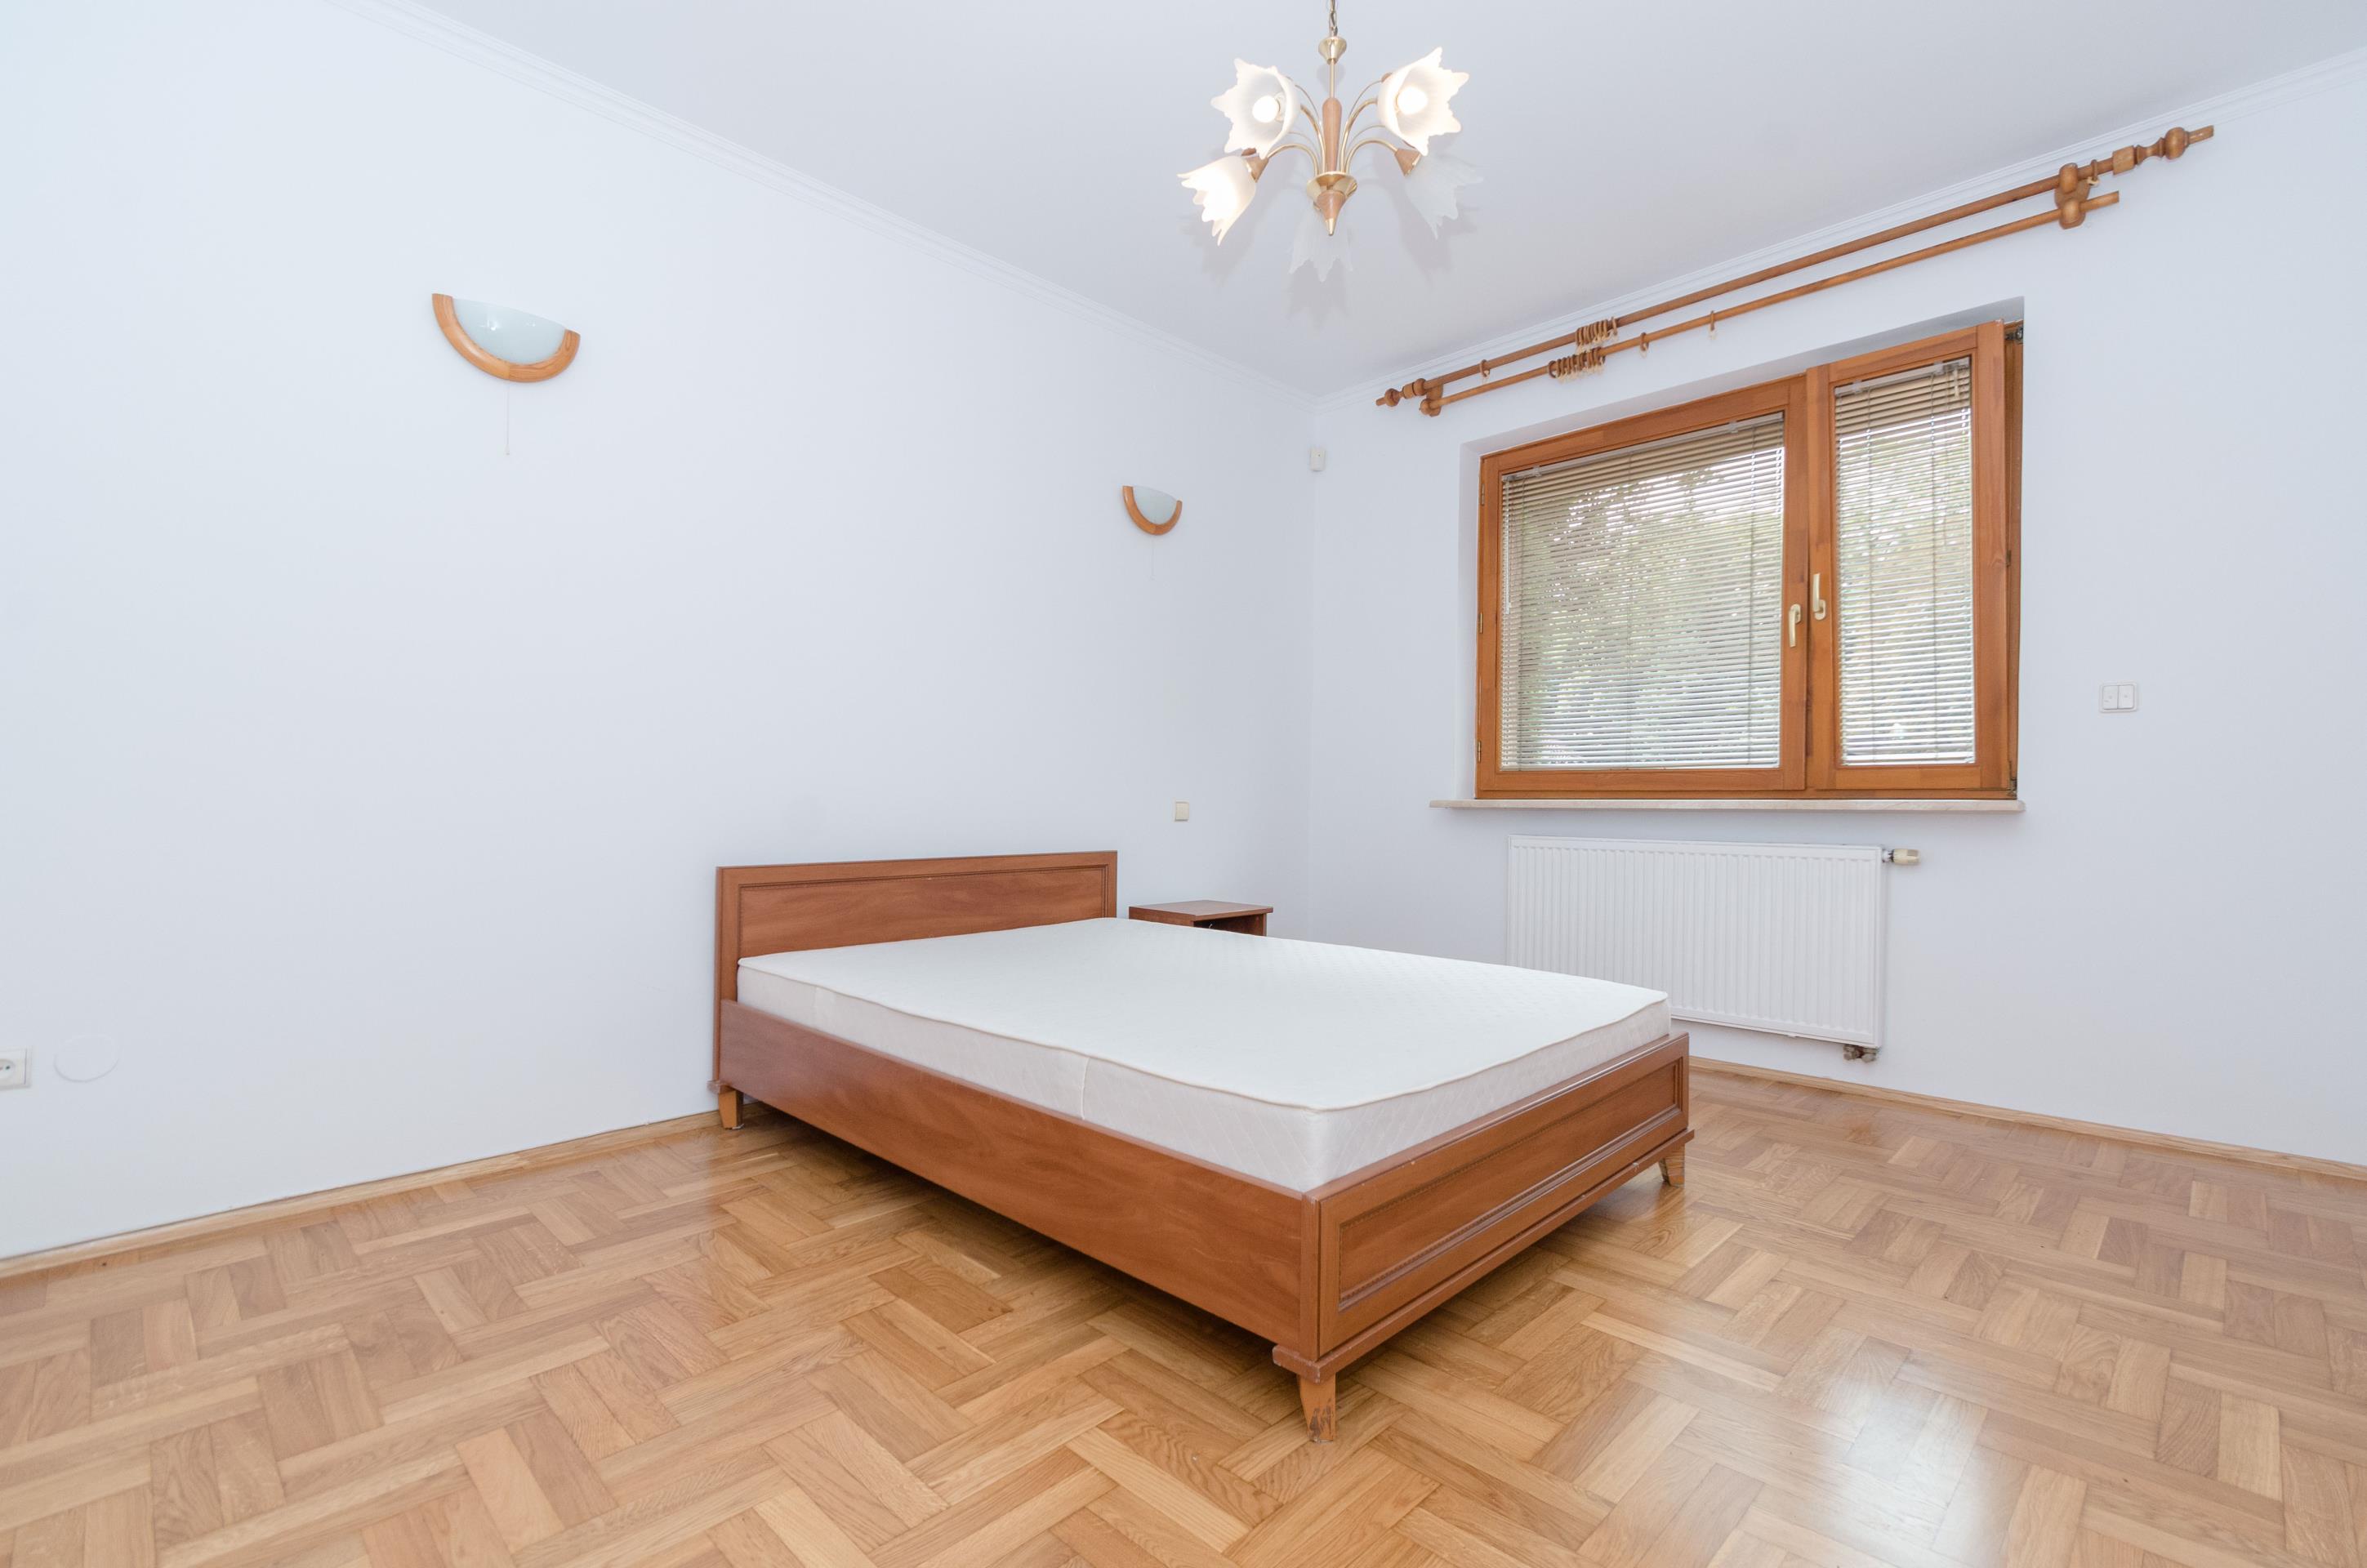 House for rent on Wola Justowska